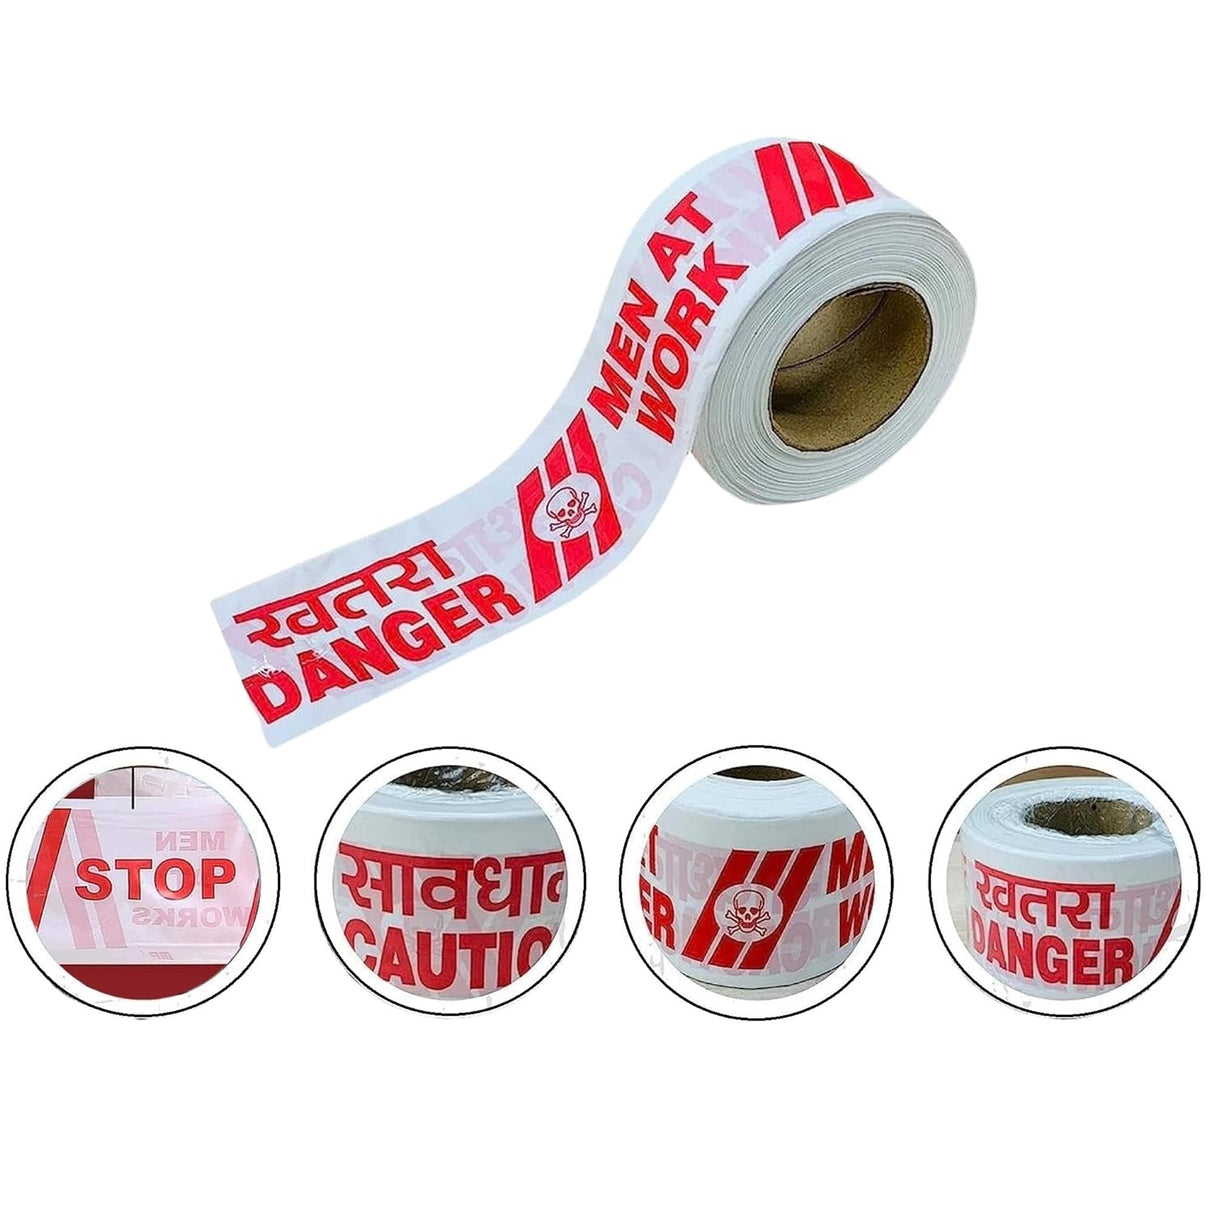 SINGHAL Caution Tape Roll 150 Meter 3” Inch Red and White, Barricade Tape Non-Adhesive Warning Tape Waterproof Polyethylene Material 150mtr (150 mtr Combo Pack of 3)